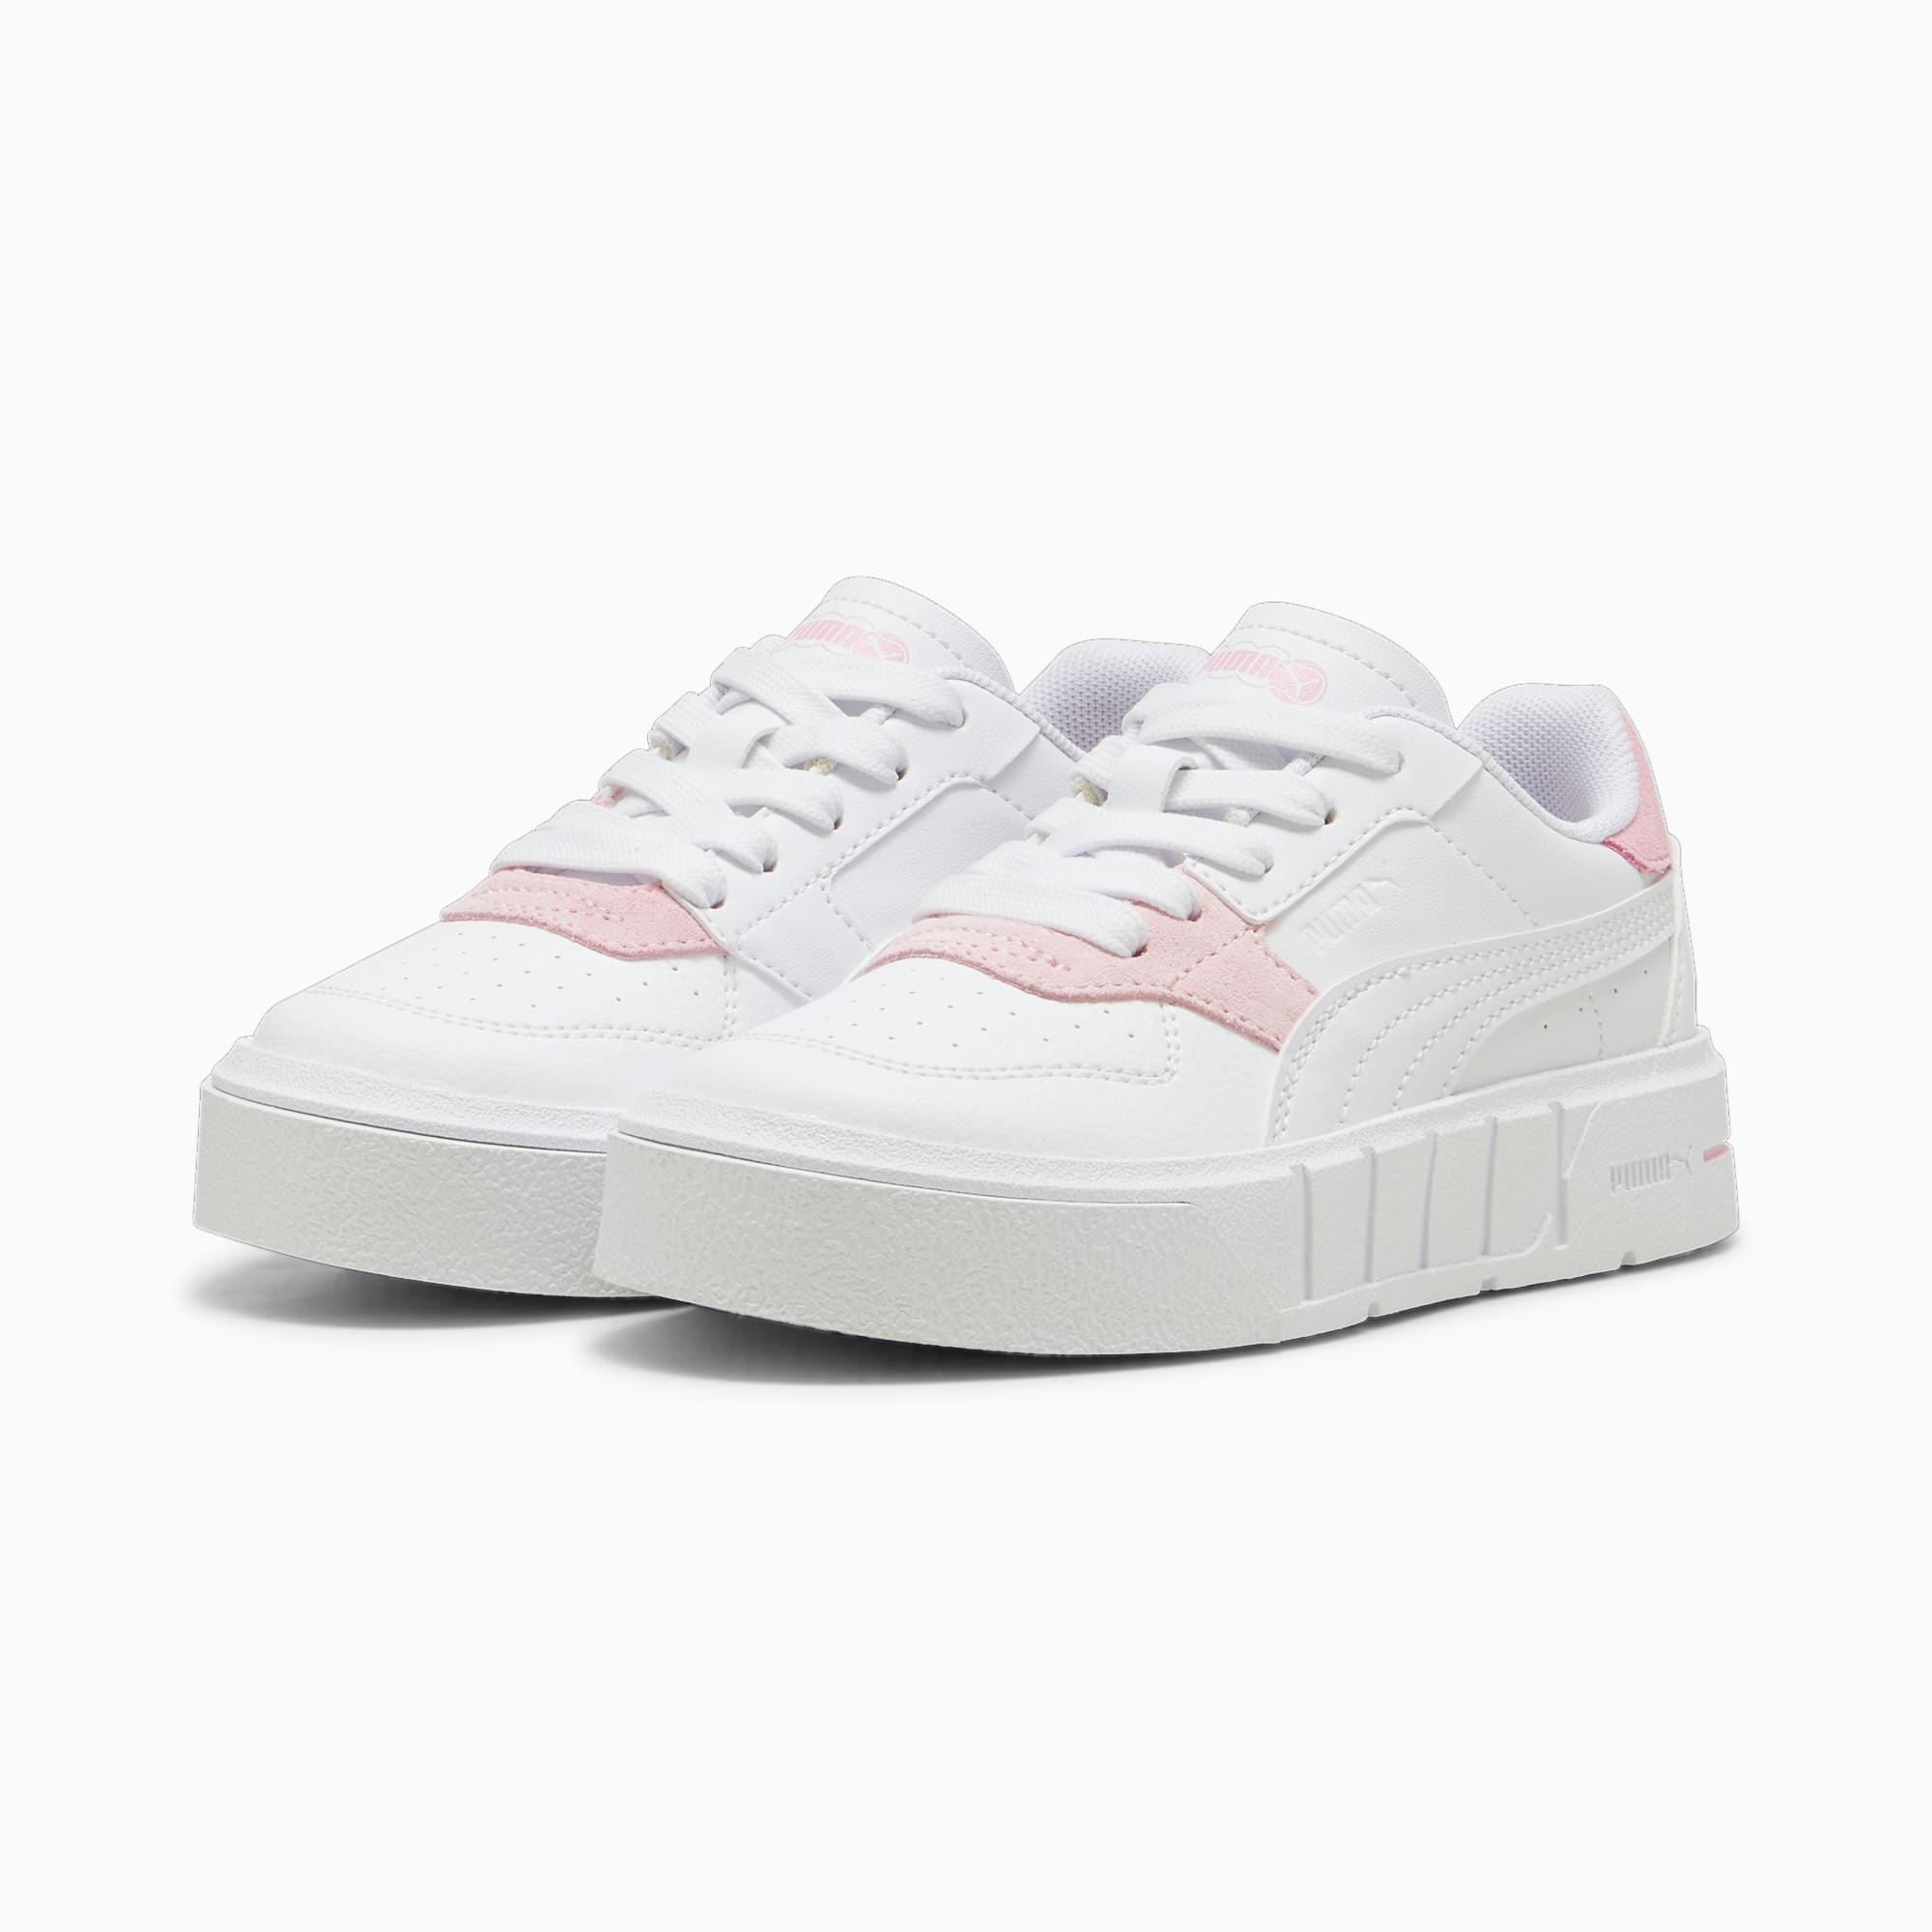 PUMA Cali Court Match Kids' Sneakers, White/Pink Lilac, Size 27,5, Shoes